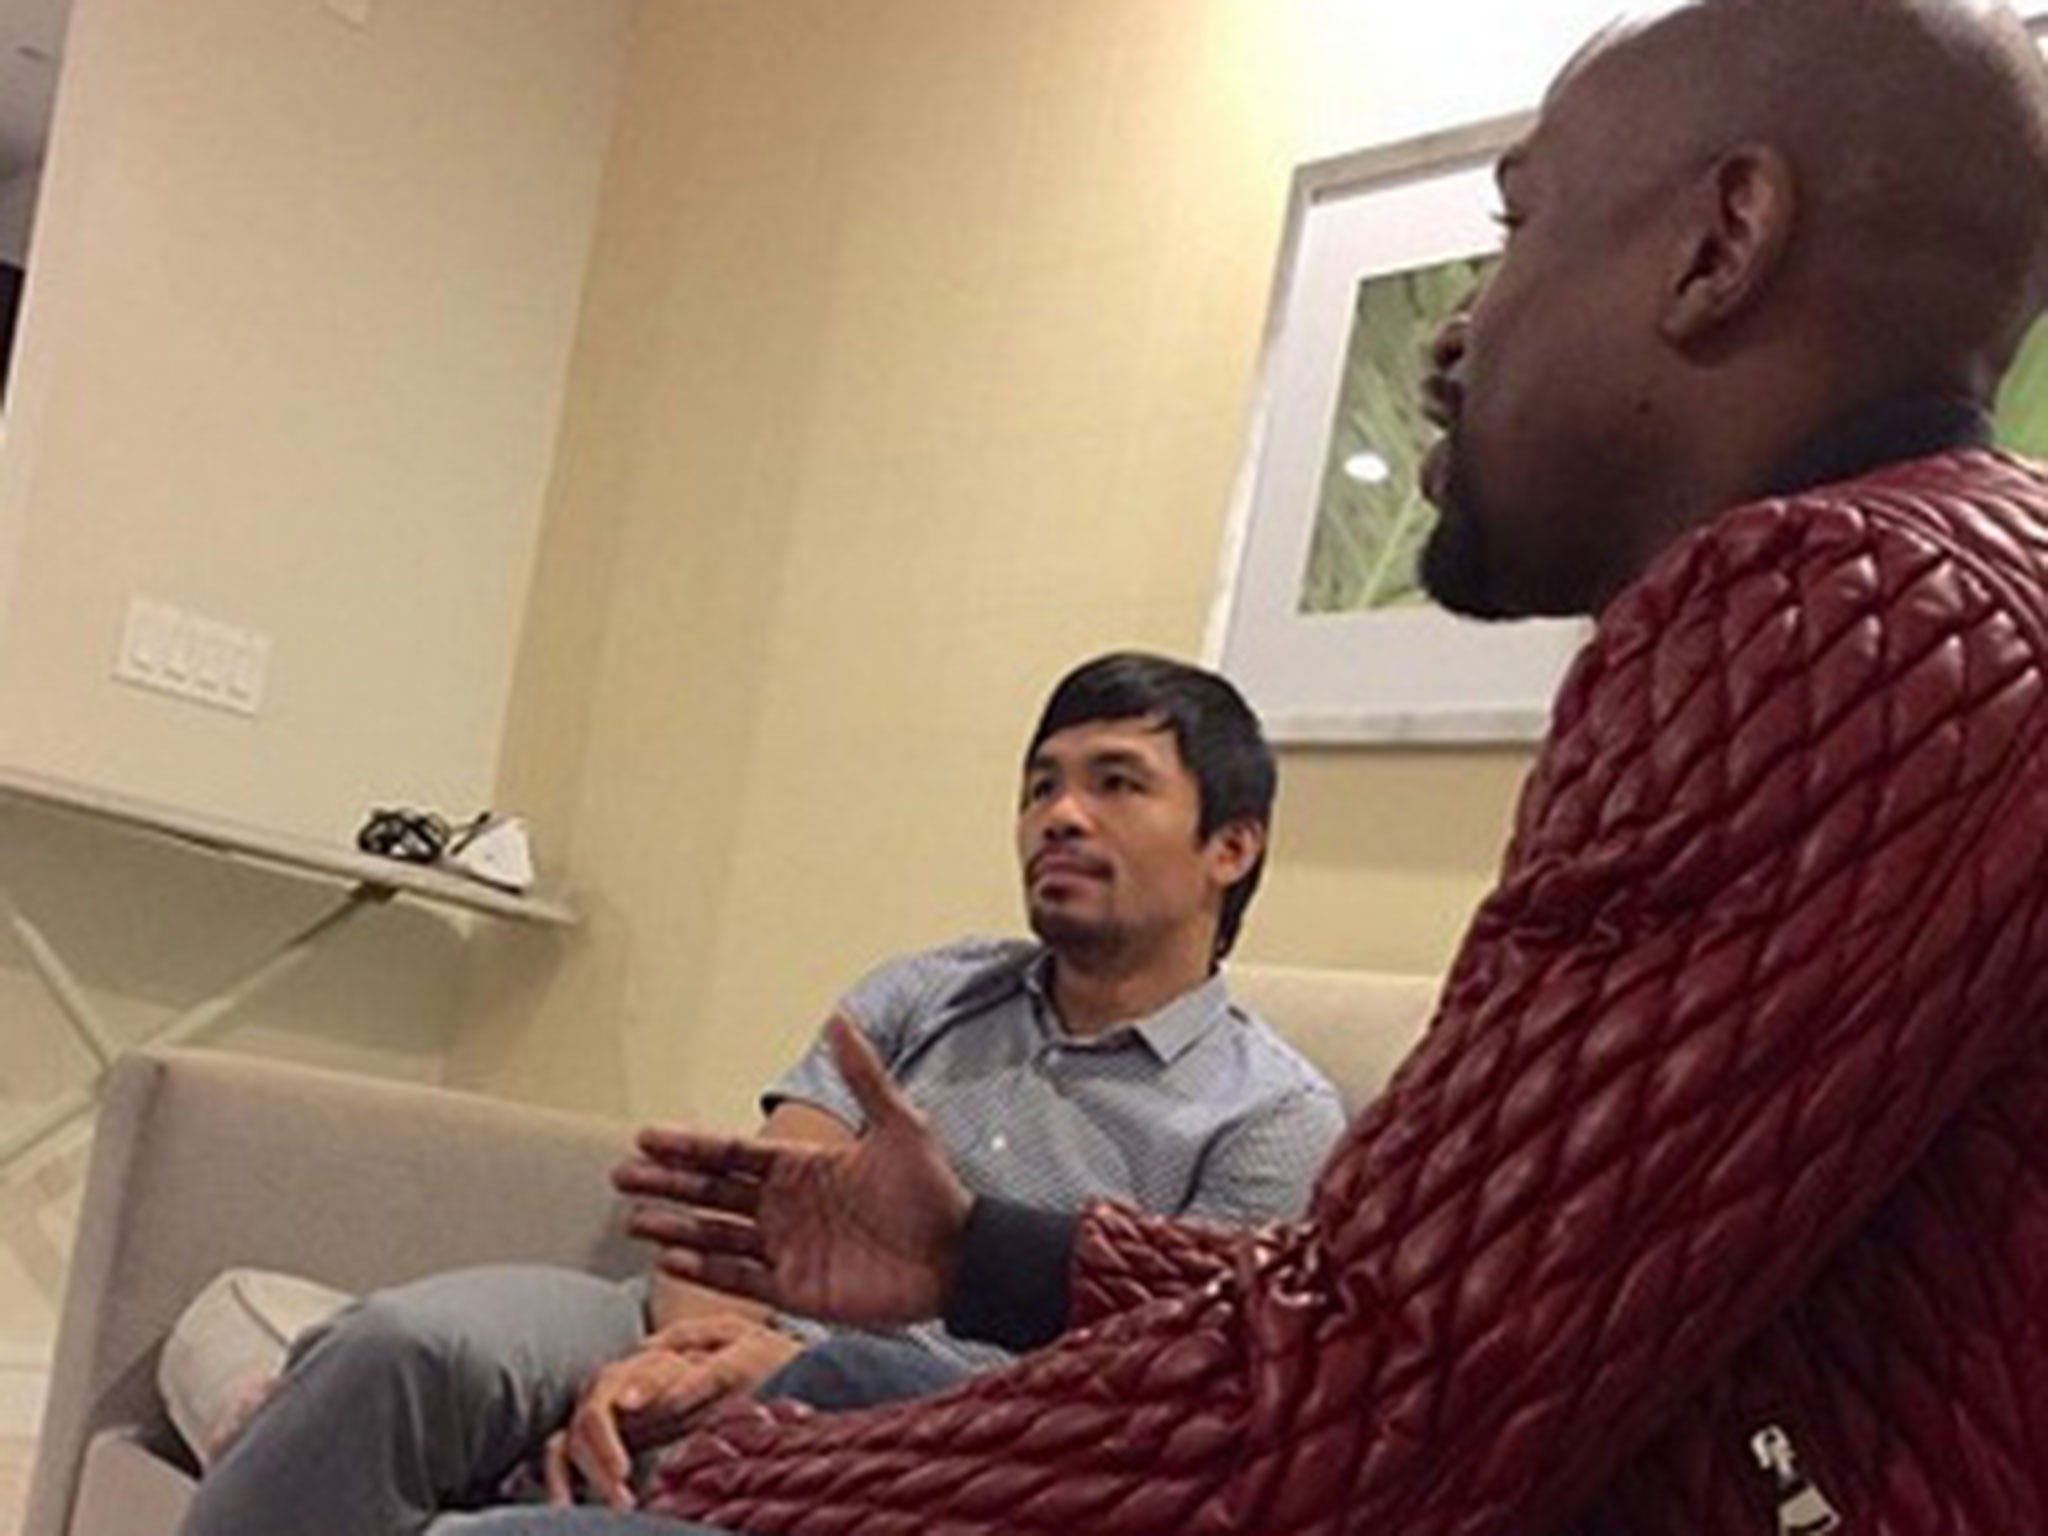 Floyd Mayweather has been posting pictures of his recent meeting with rival Manny Pacquiao